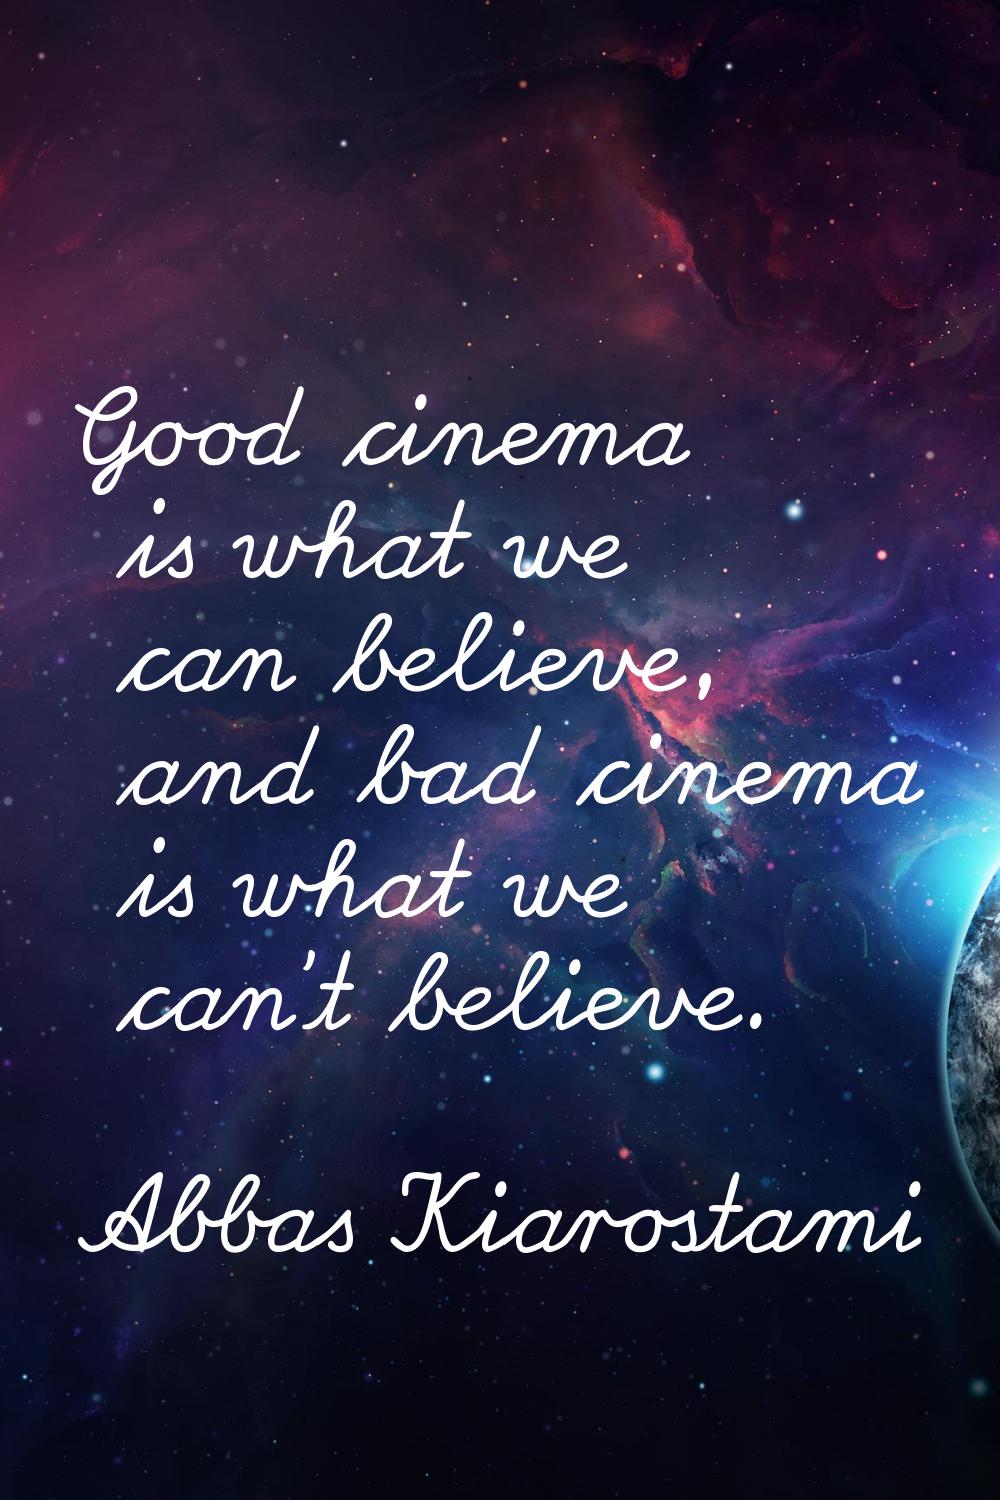 Good cinema is what we can believe, and bad cinema is what we can't believe.